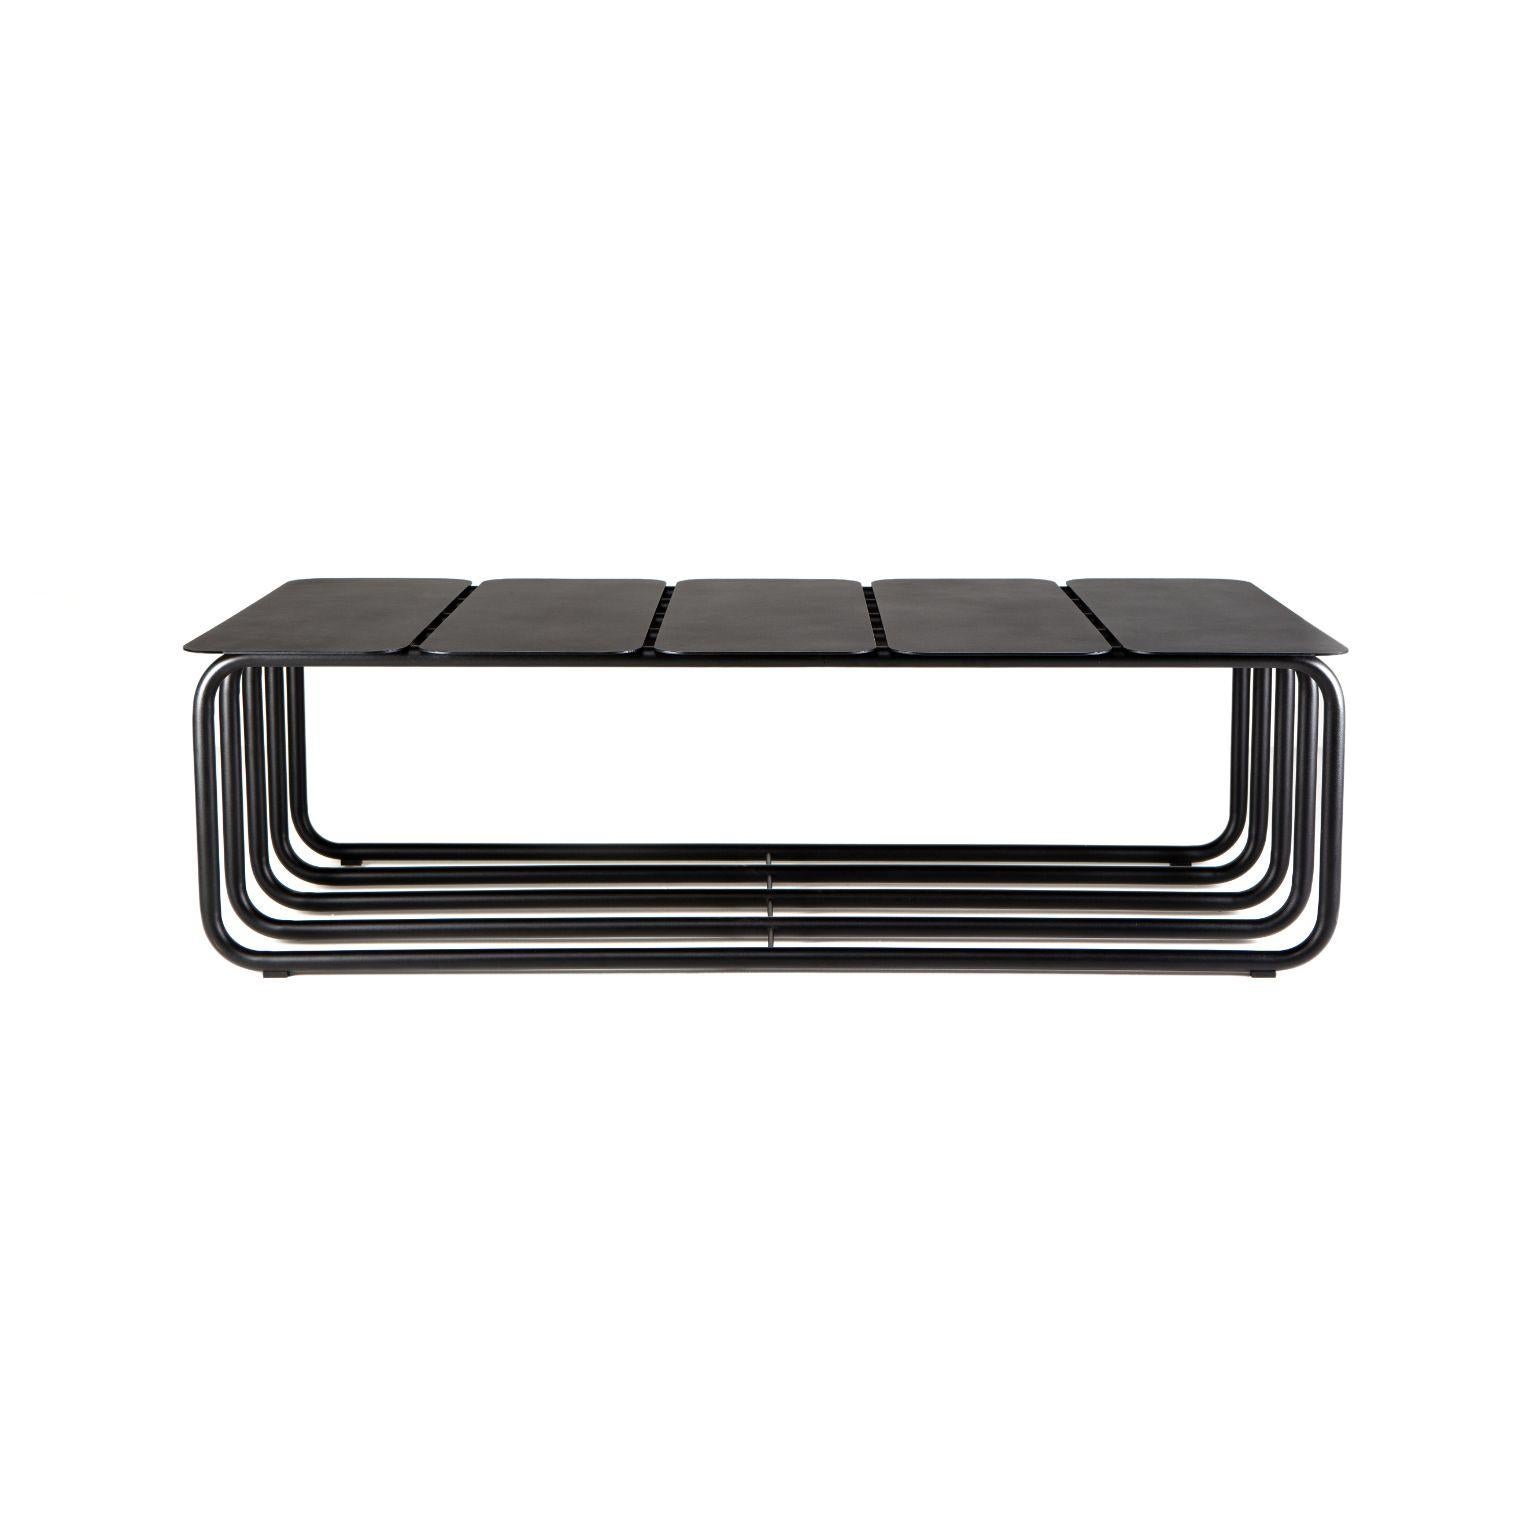 Dureza - coffee table by Cultivado Em Casa.
Dimensions: 120 x 60 x 35 cm.
Materials: Carbon steel and electrostatic painting.

Carbon steel reigns as raw material, guiding both the simple and rigorous shapes and the graphic language of this new